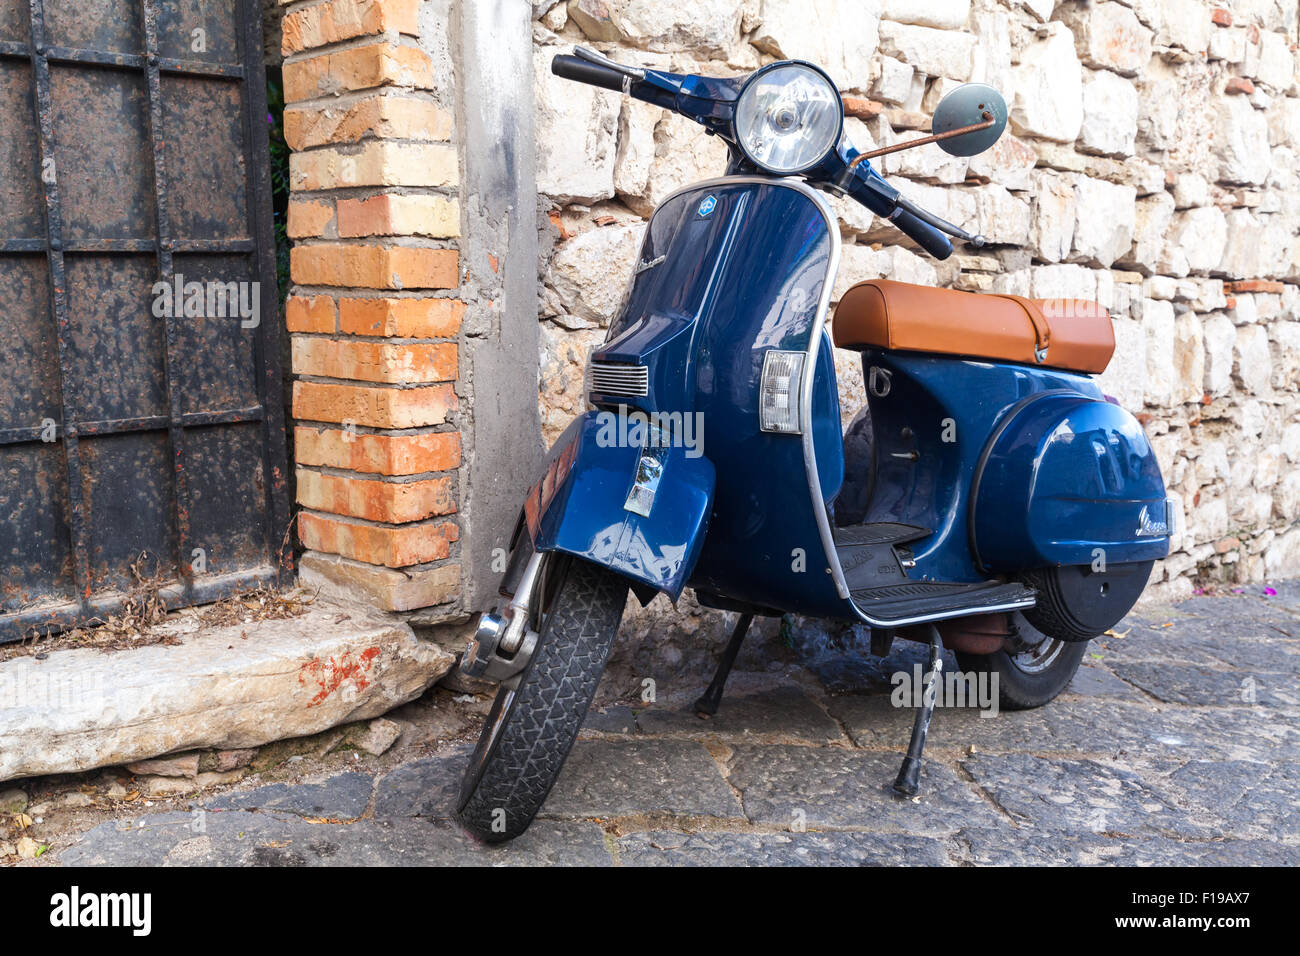 Piaggio Px Vespa High Resolution Stock Photography and Images - Alamy